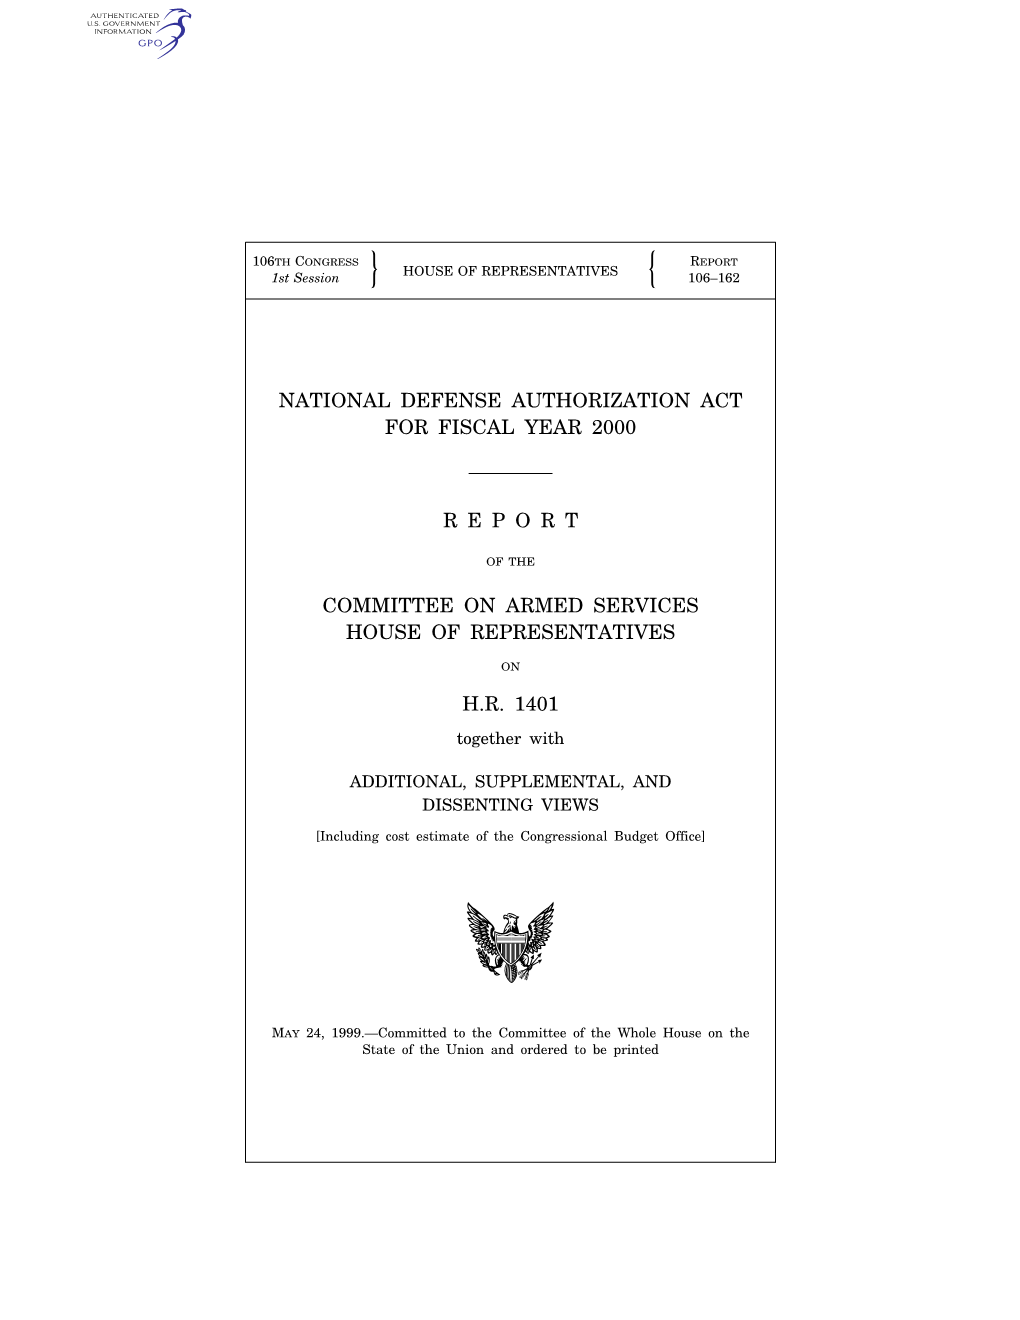 National Defense Authorization Act for Fiscal Year 2000